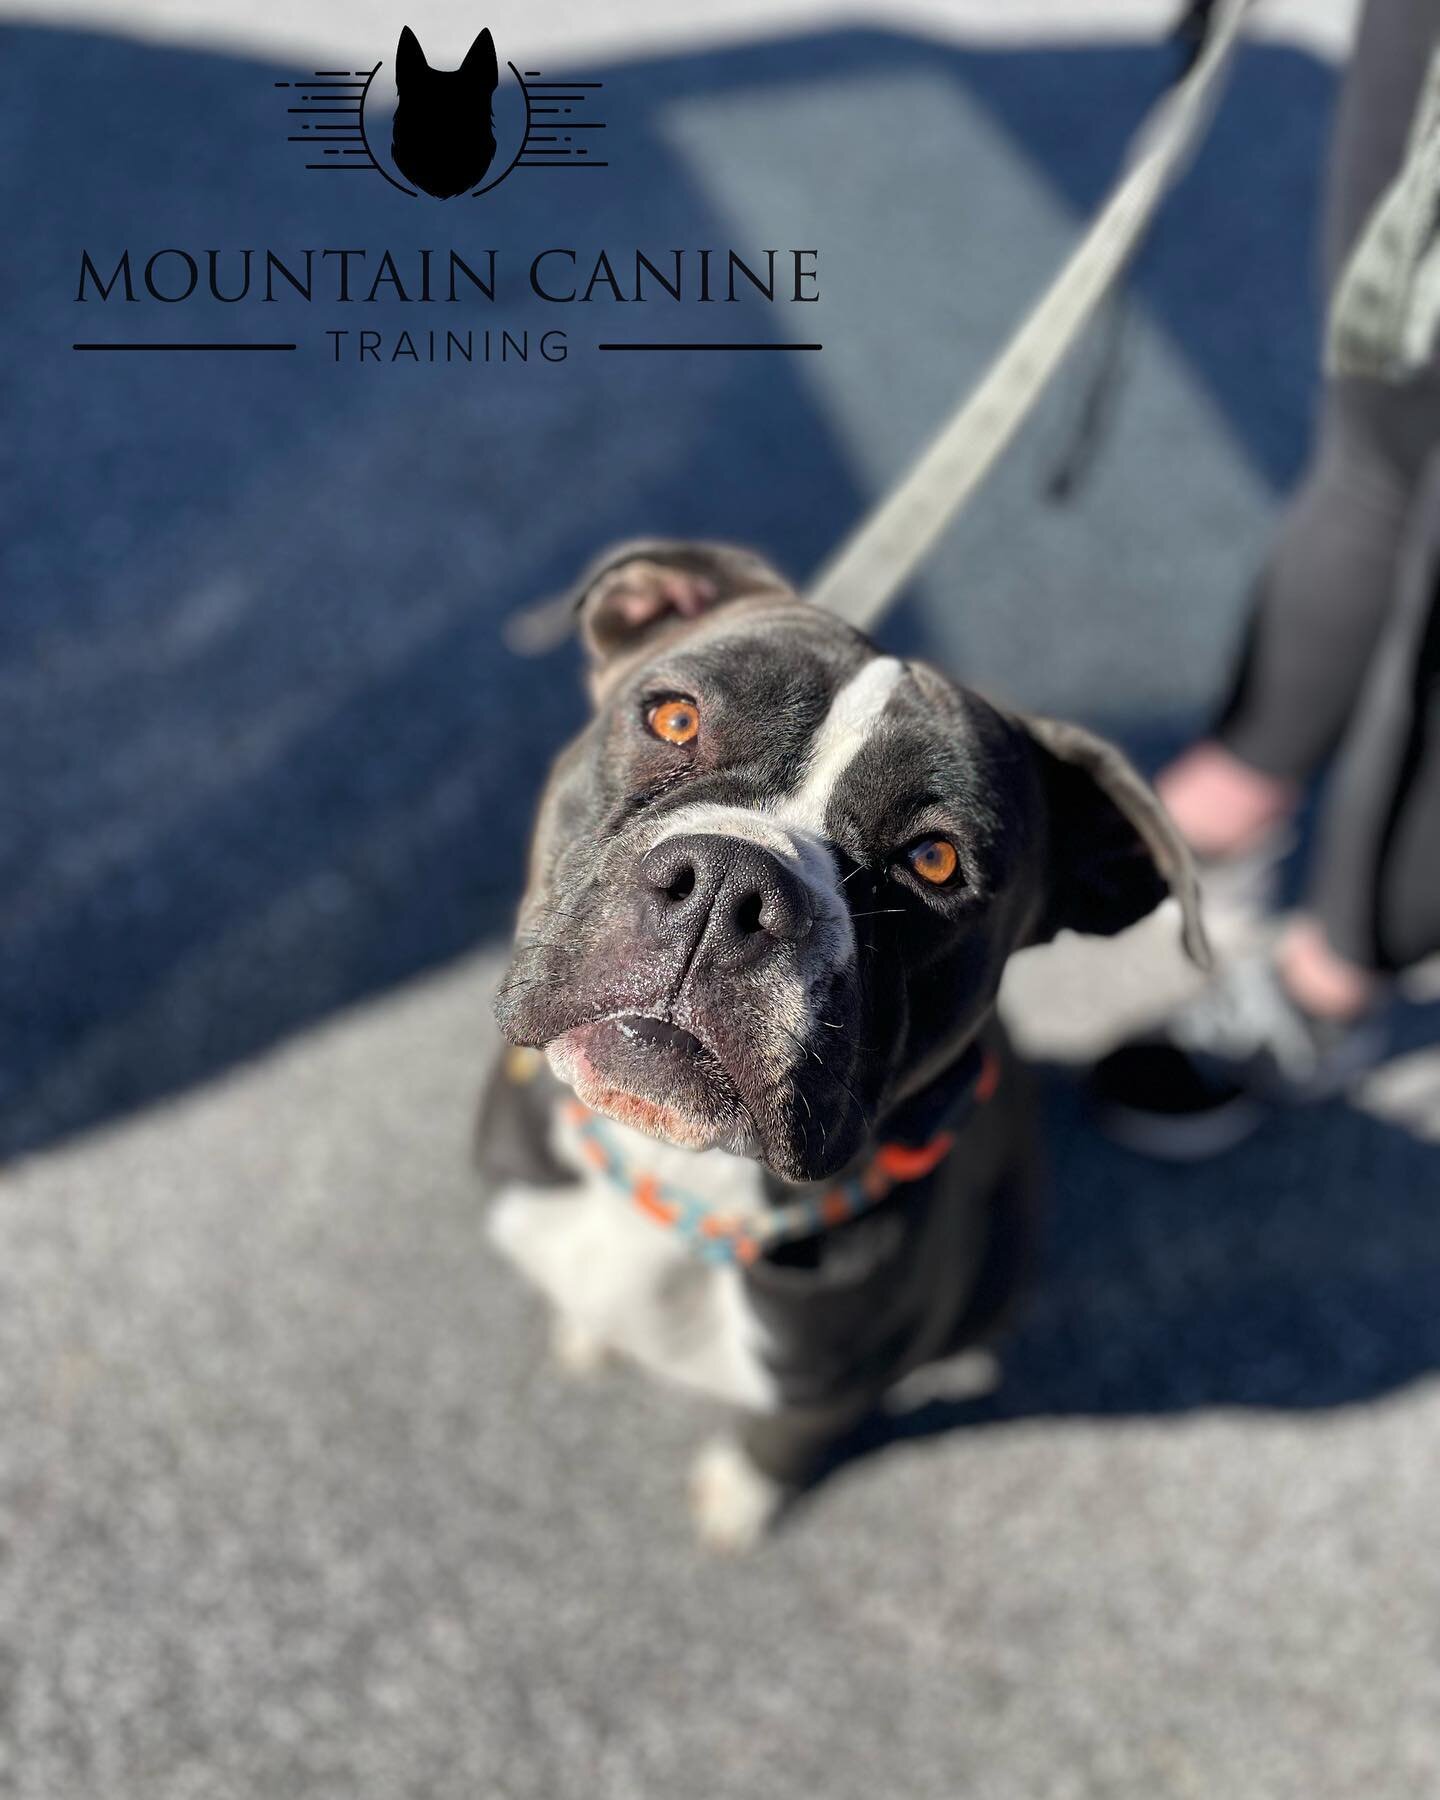 &ldquo;We cannot become what we want by remaining what we are.&rdquo; 

So train your dawgs!! #HappyTraining
🐺
🐺
🐺
#mountaincaninetraining #mct #828isgreat #brevardnc #dogtraining #explorebrevardnc